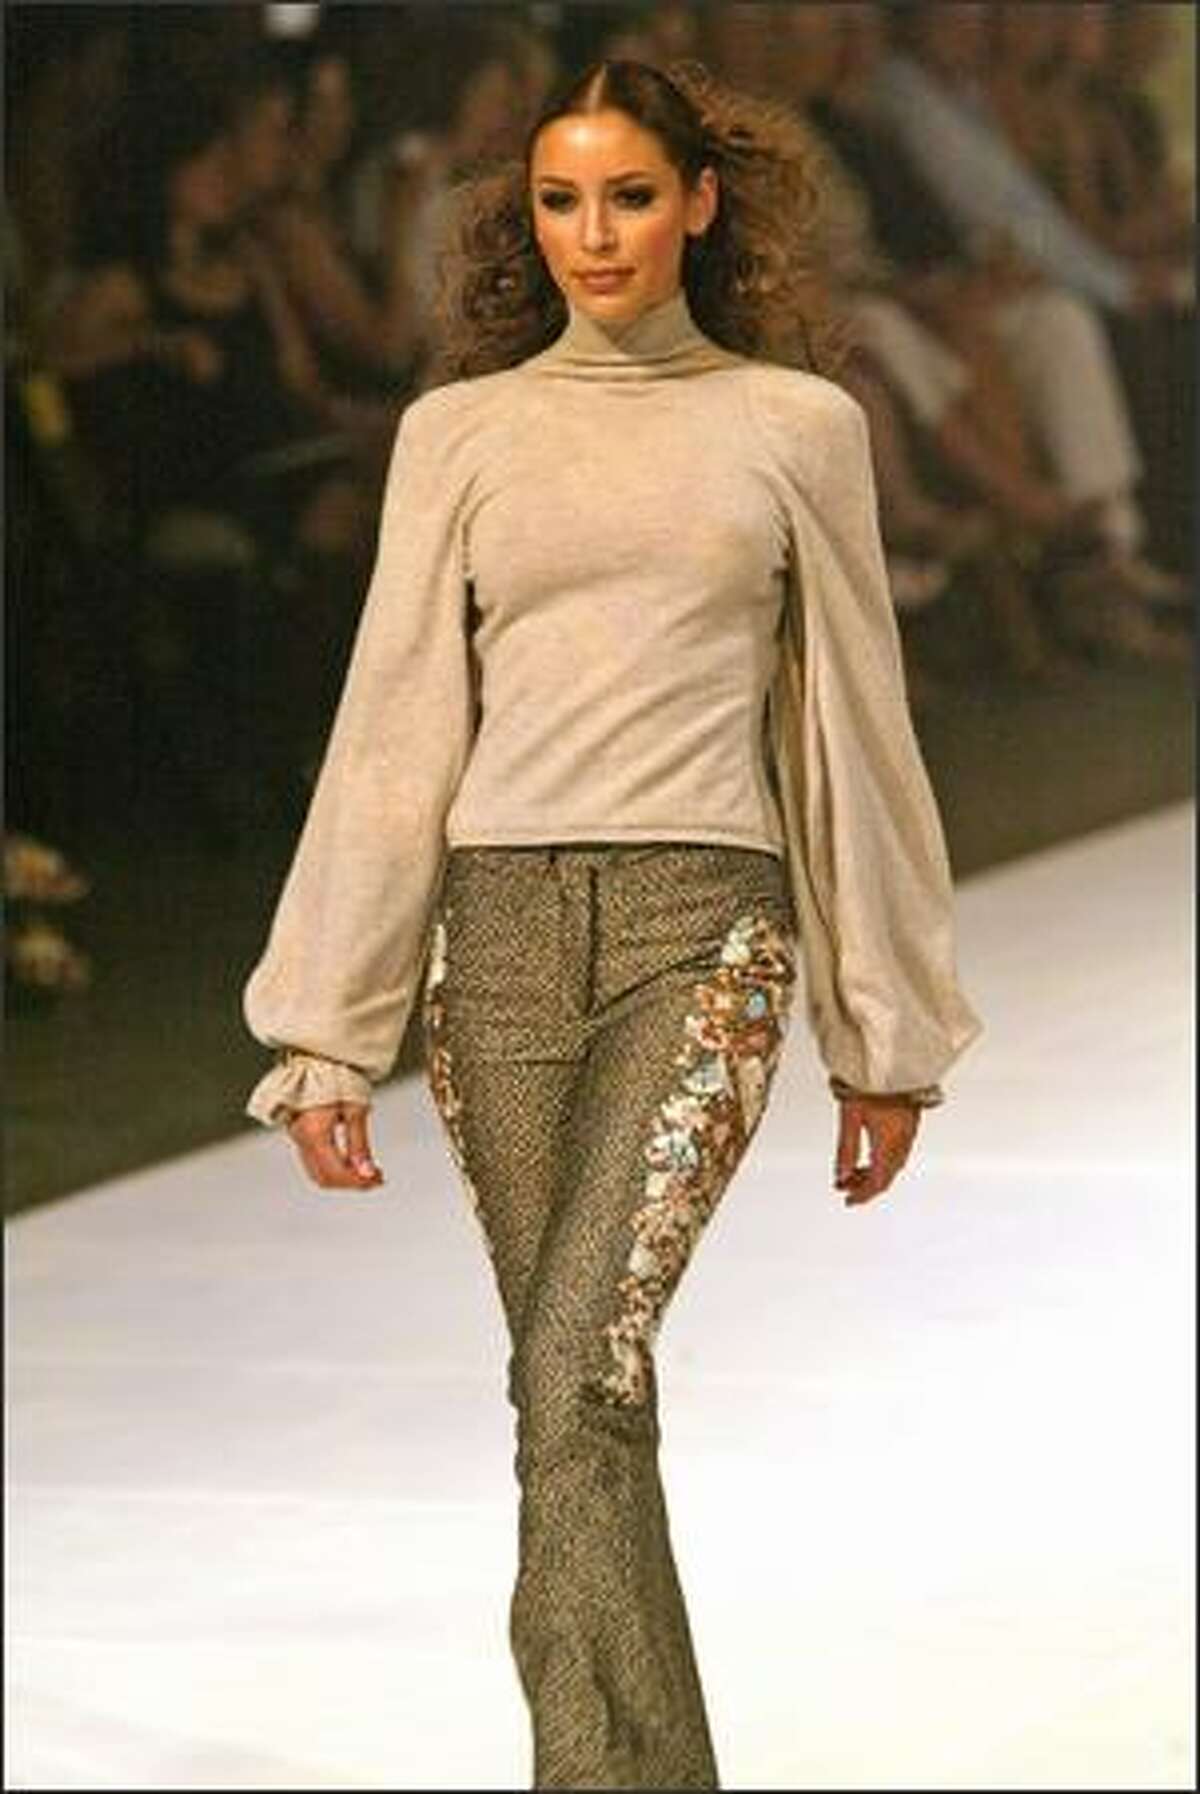 ZAC POSEN COLLECTION: Oatmeal cashmere admiral turtleneck with billow sleeves. Tan embroidered "Antoinette" pants.